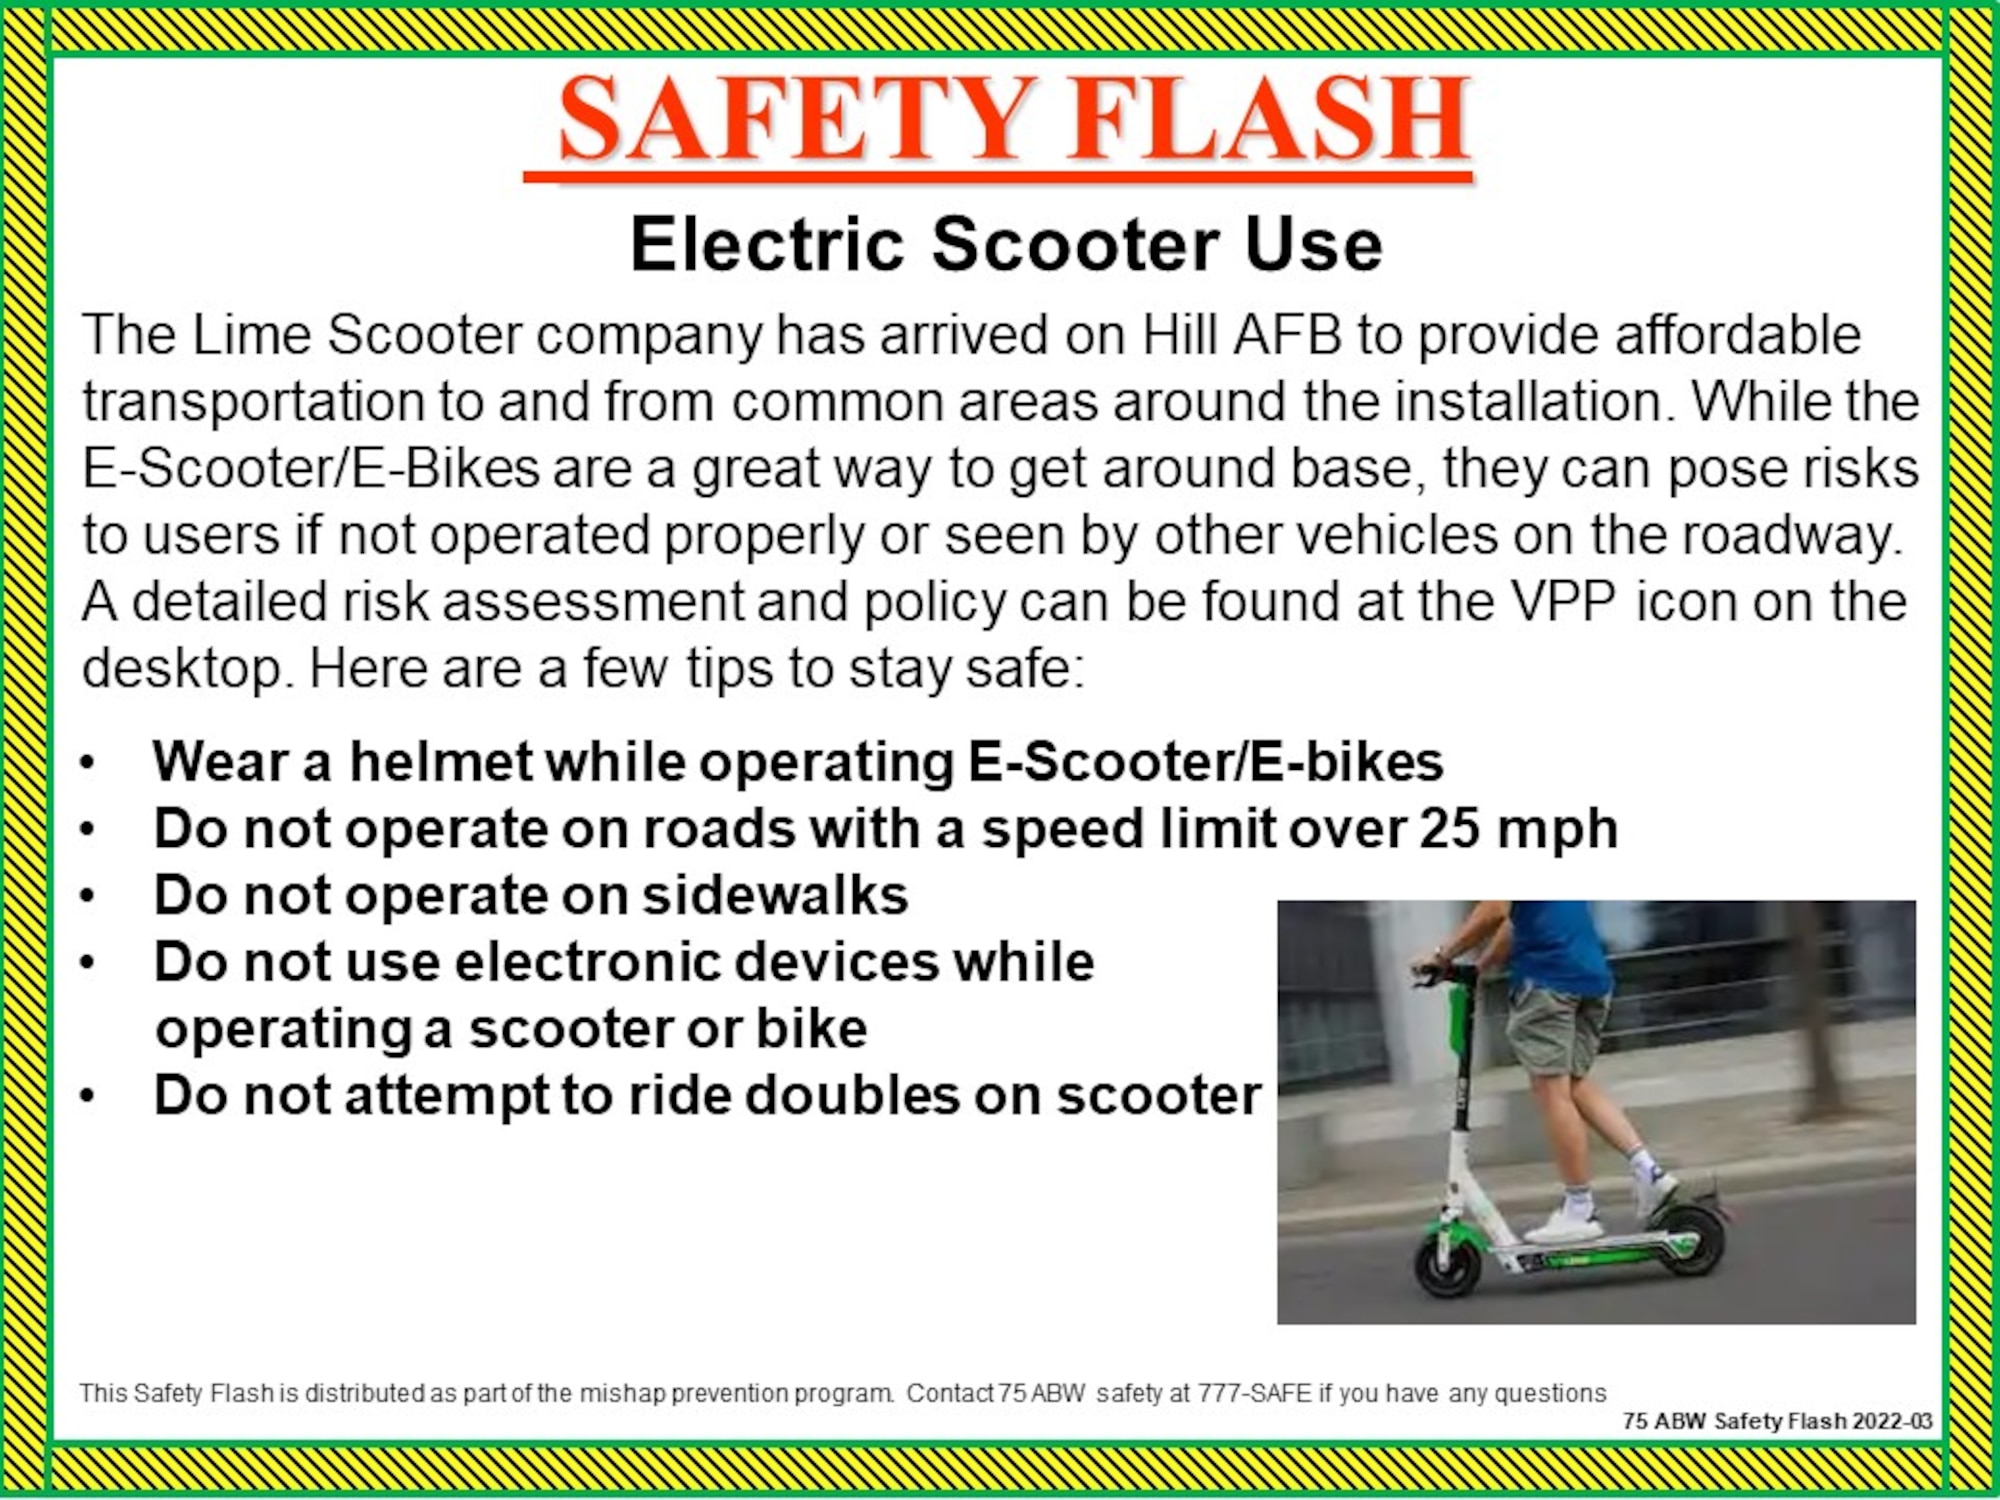 Dos and don'ts on an electric scooter or bike